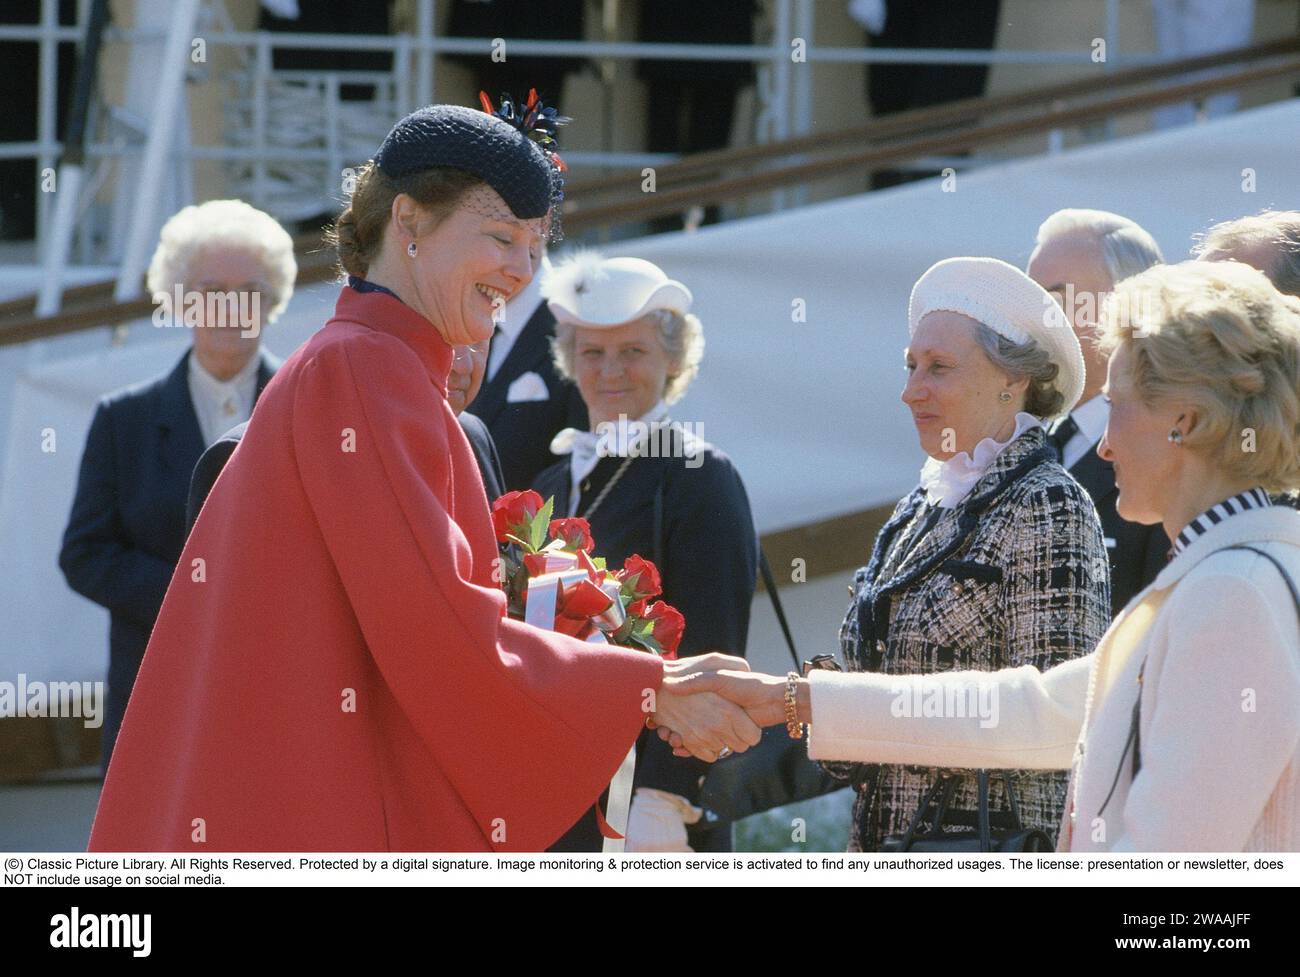 Queen Margrethe II of Denmark. Pictured having traveled to Sweden on the royal ship Dannebrogen and is being greeted welcome. 1985 Stock Photo